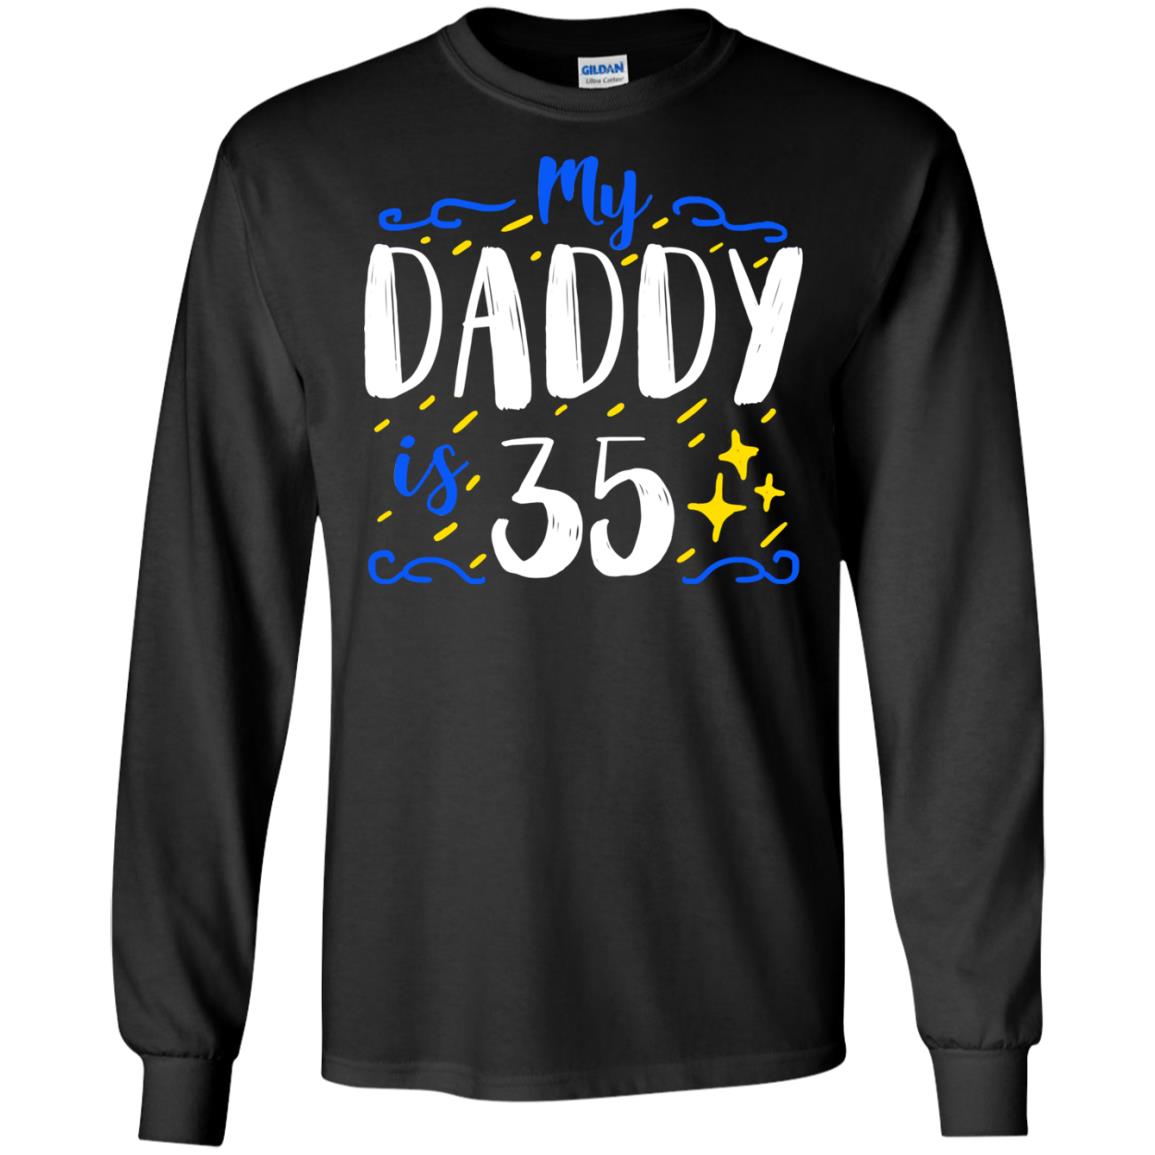 My Daddy Is 35 35th Birthday Daddy Shirt For Sons Or DaughtersG240 Gildan LS Ultra Cotton T-Shirt